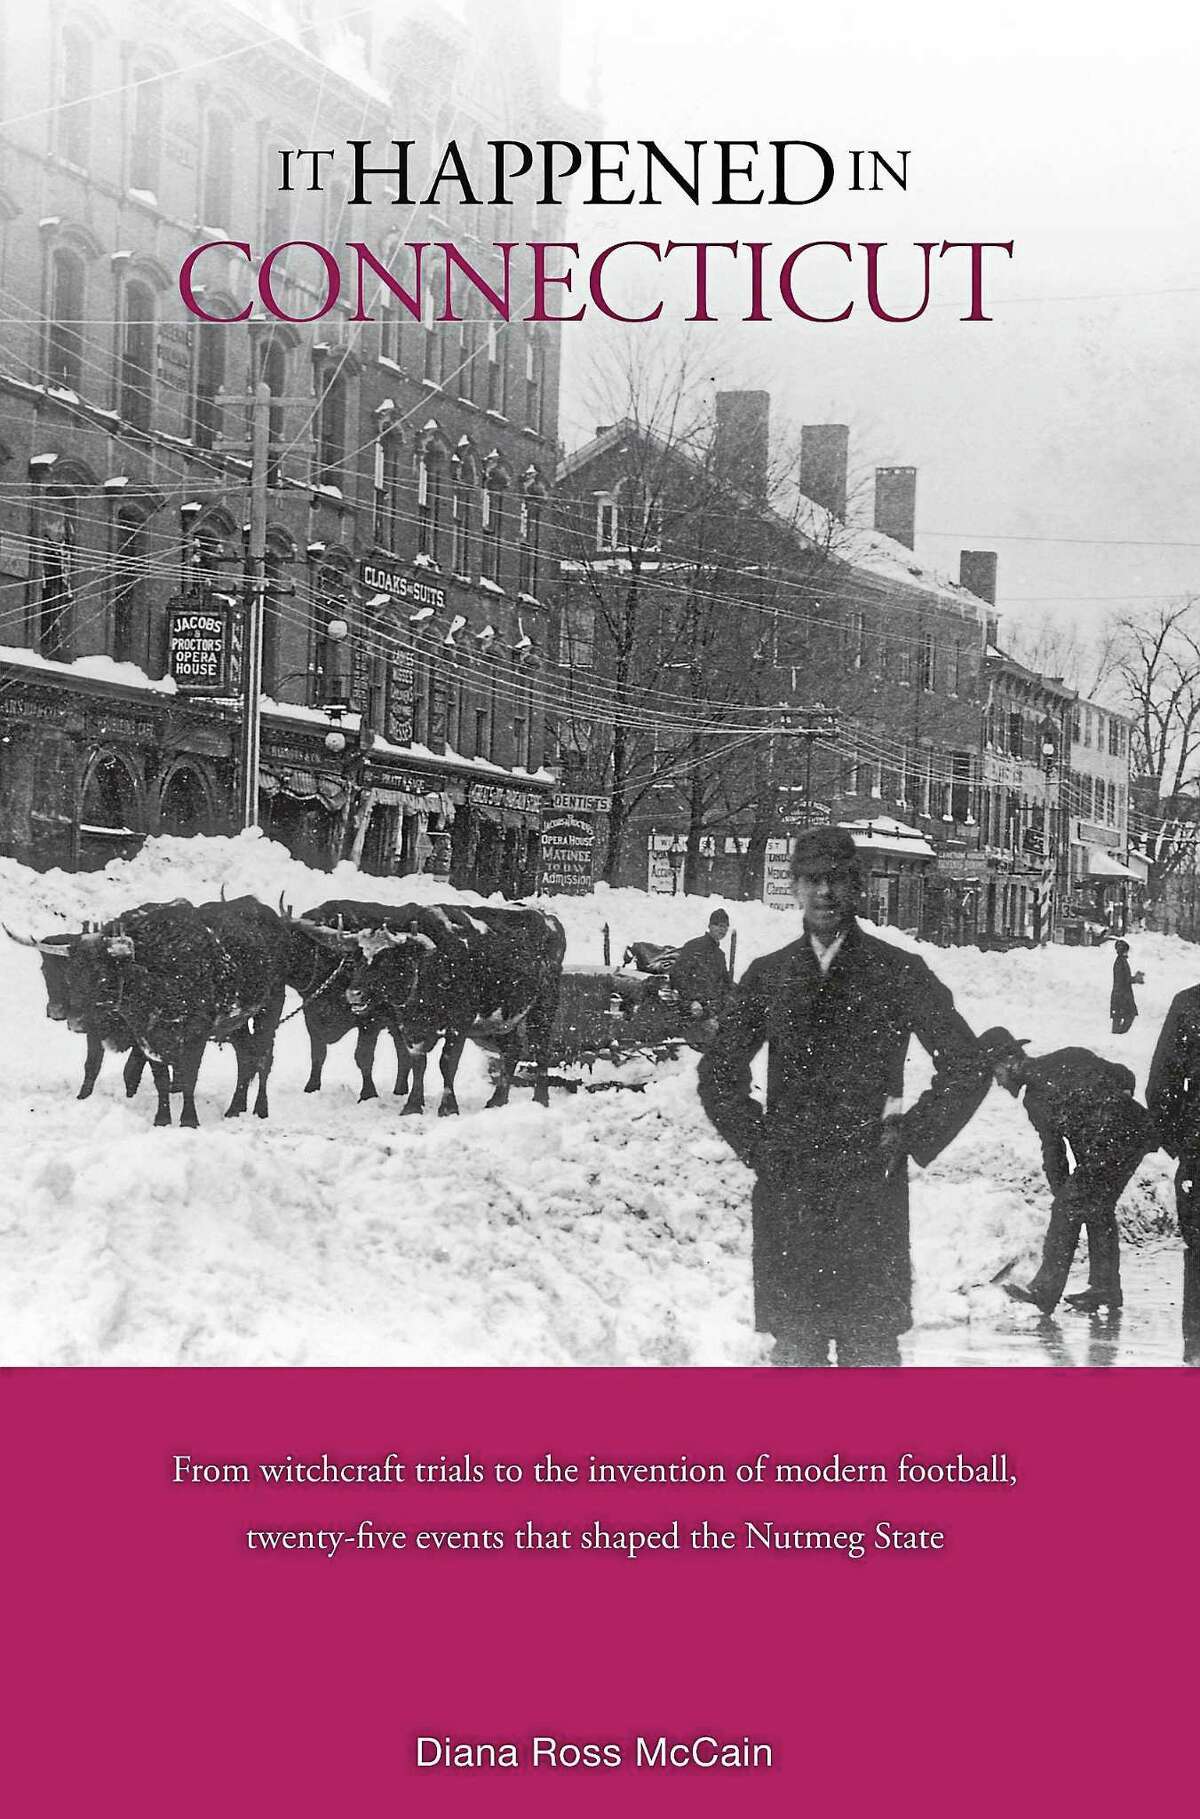 The cover of “It Happened in Connecticut.”